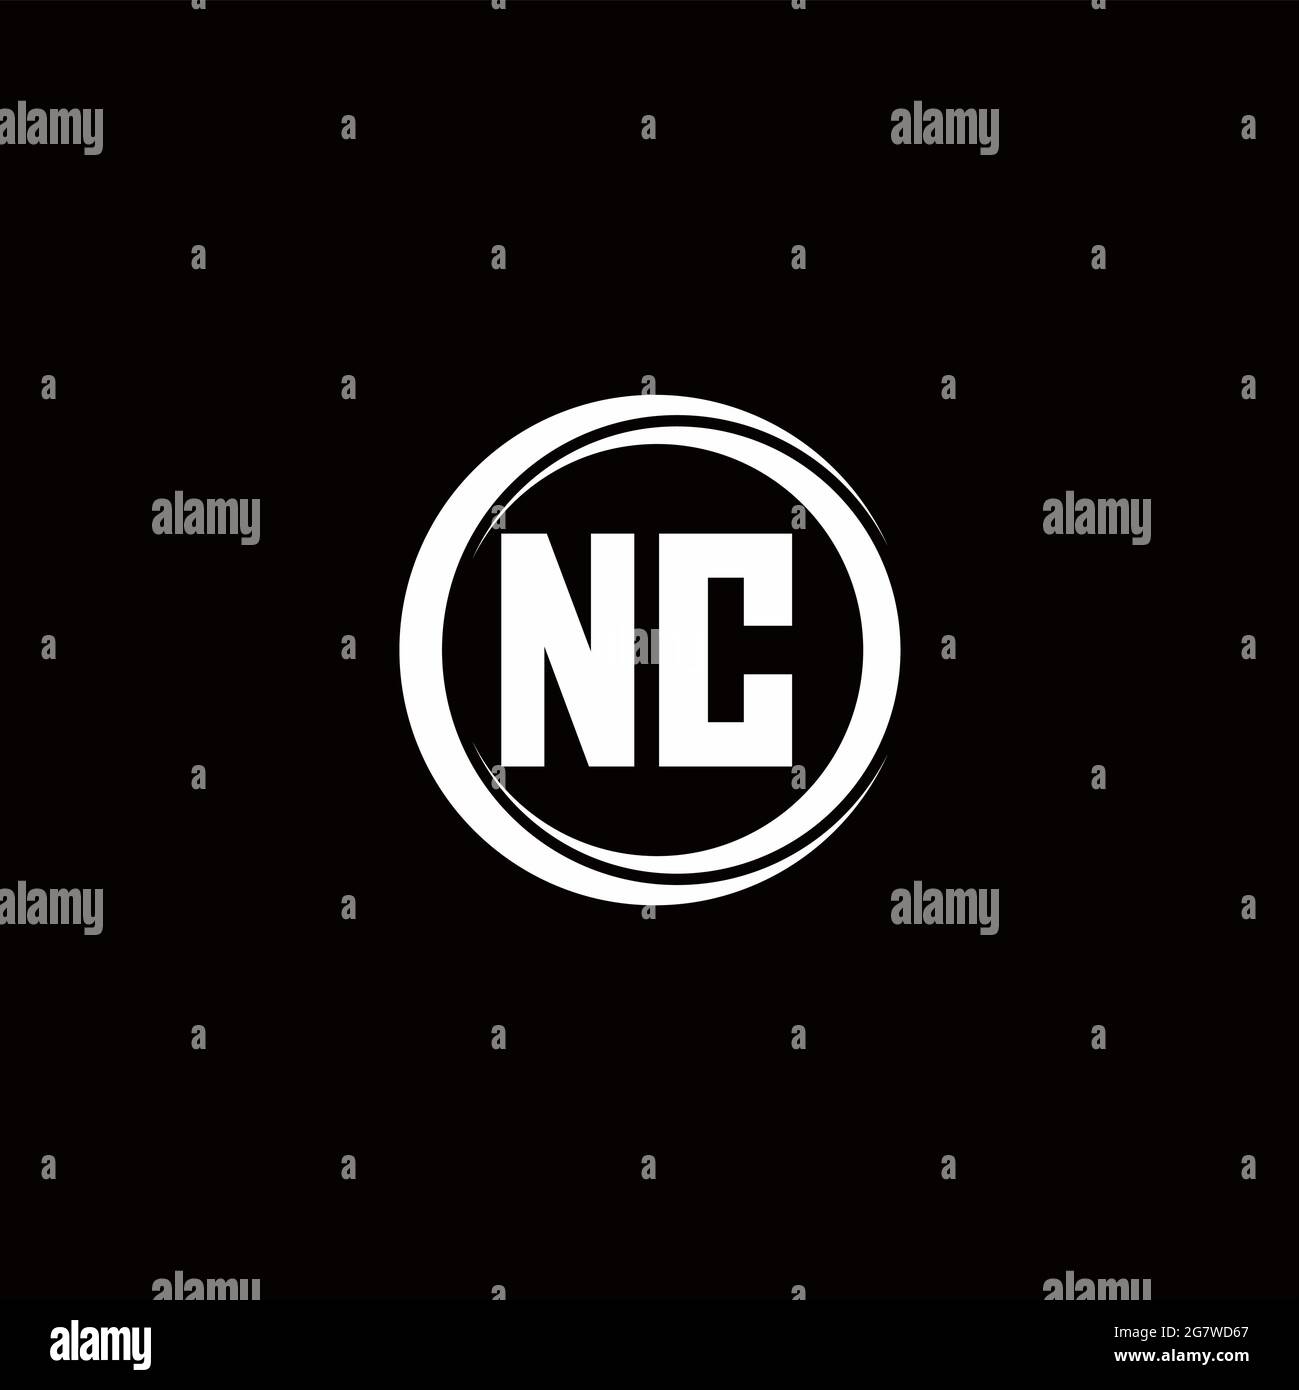 NC logo initial letter monogram with circle slice rounded design ...